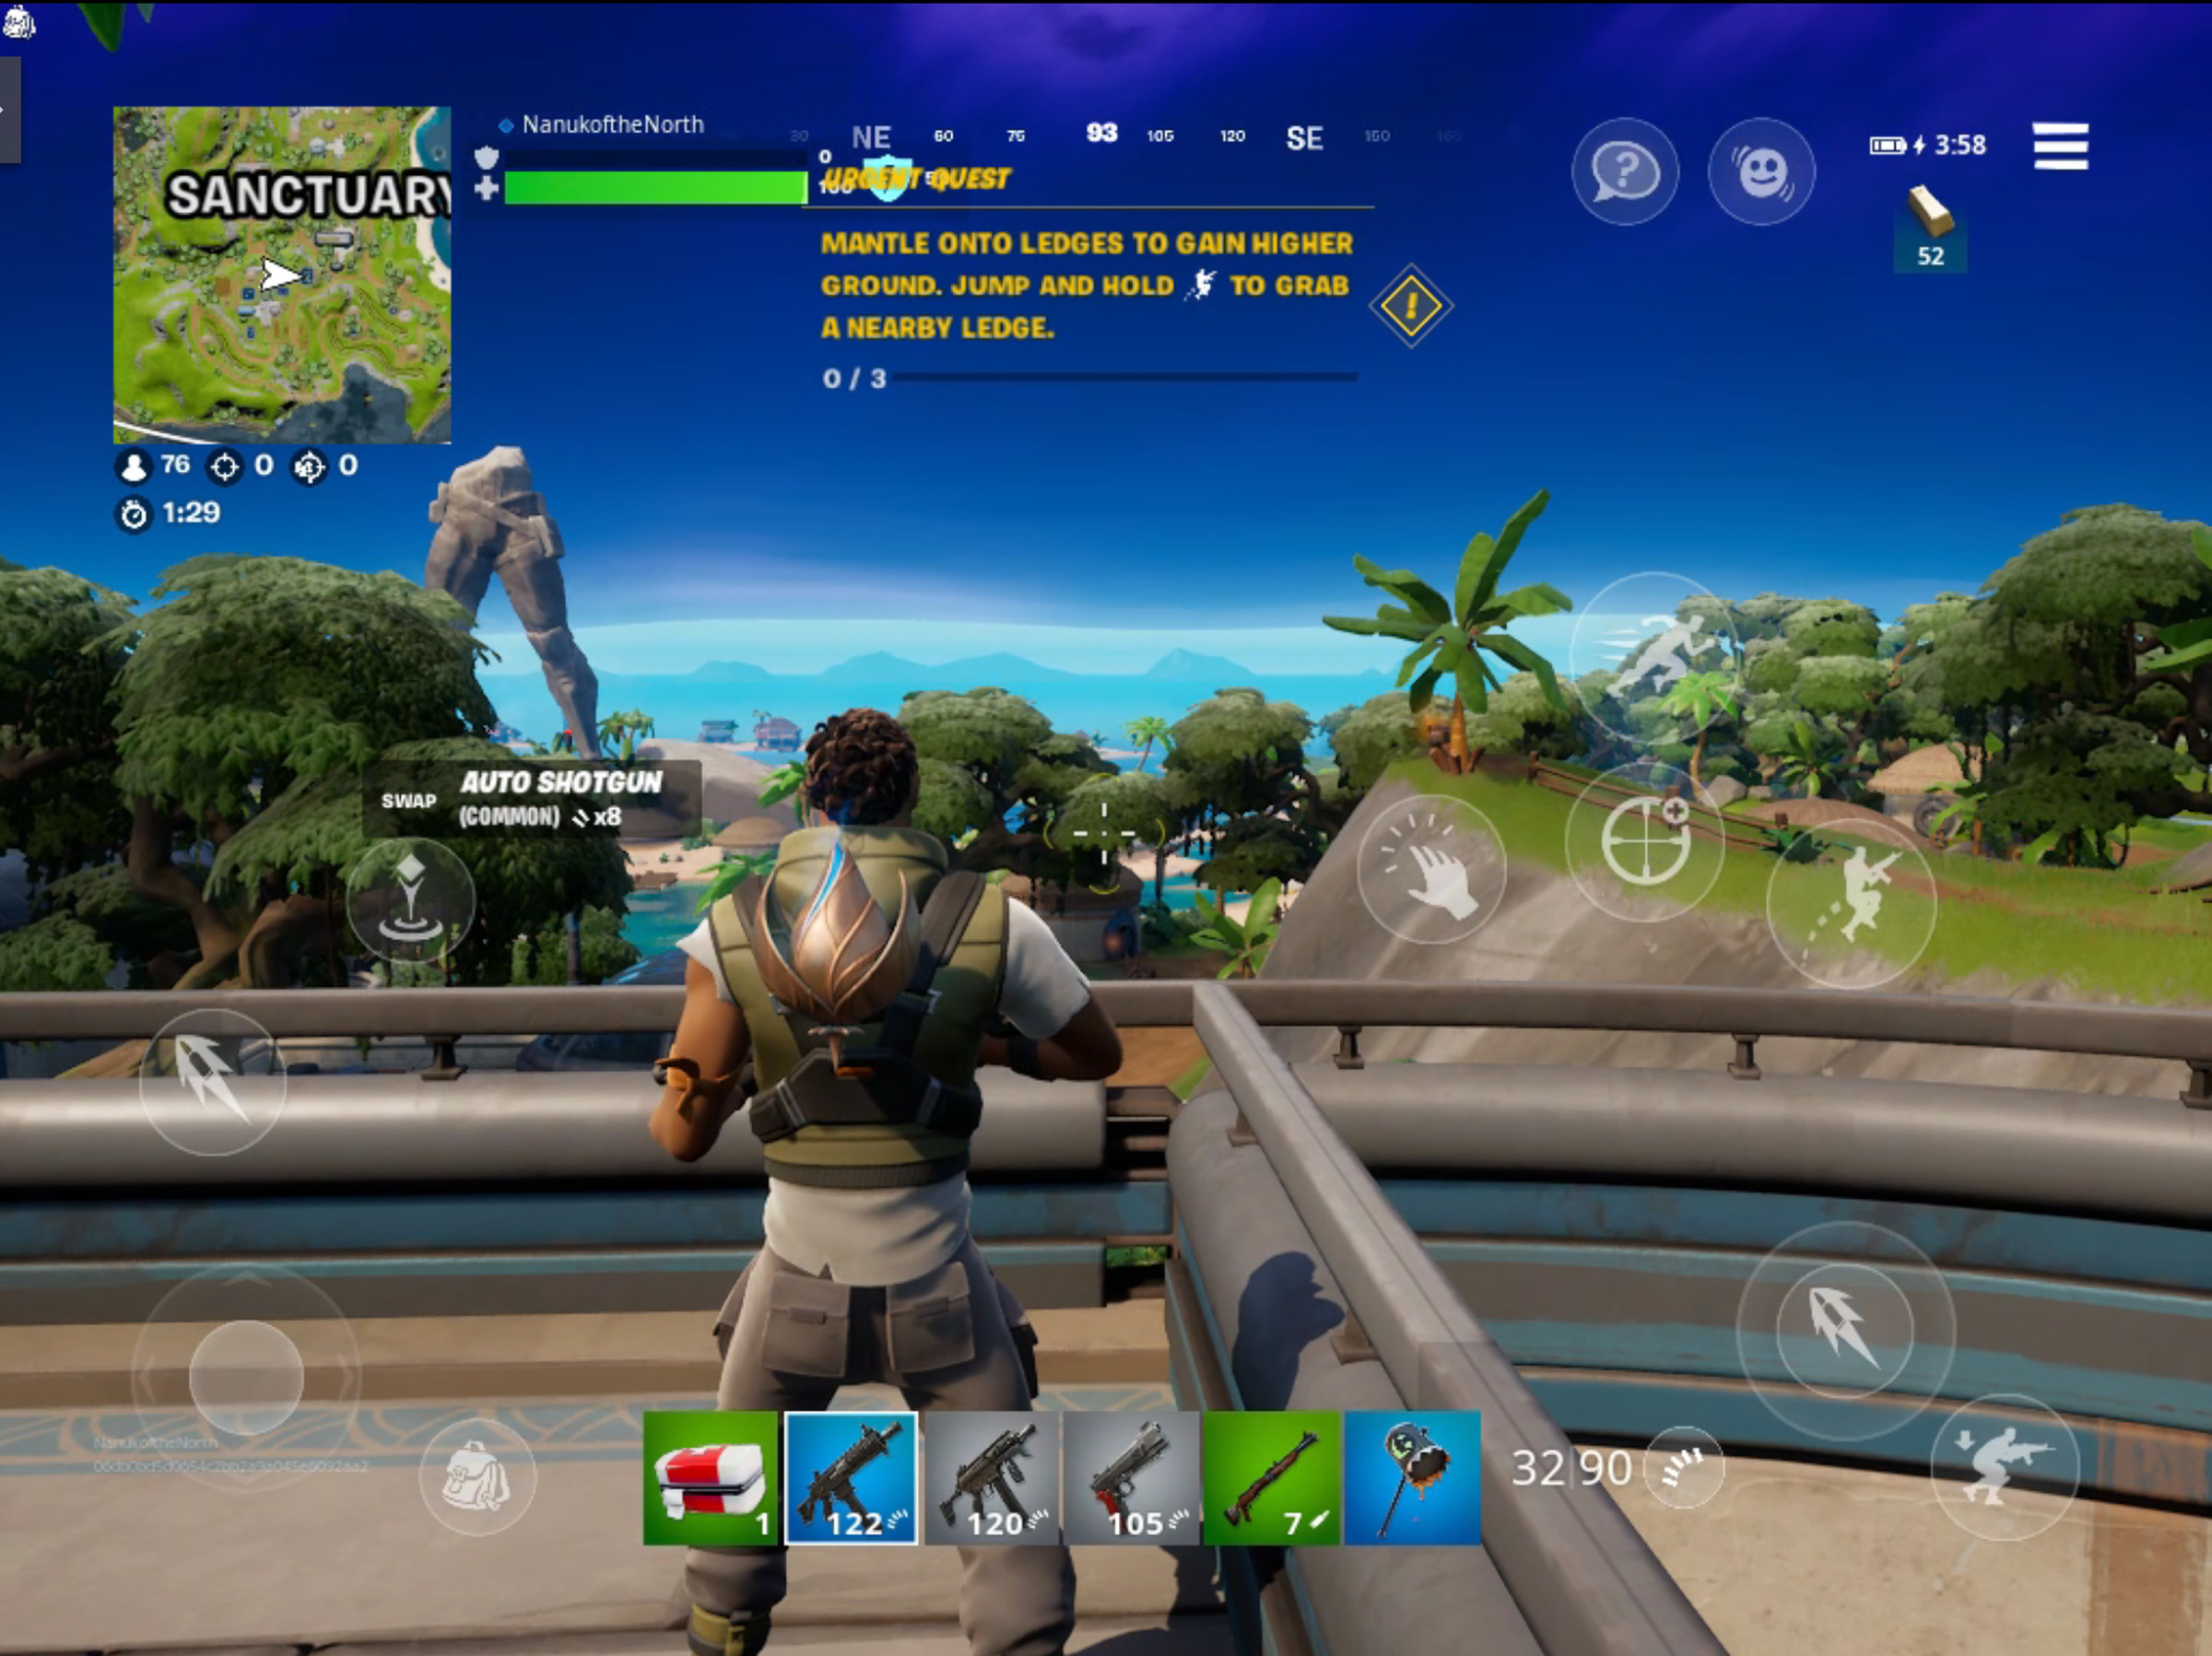 Fortnite’s on-screen control interface.